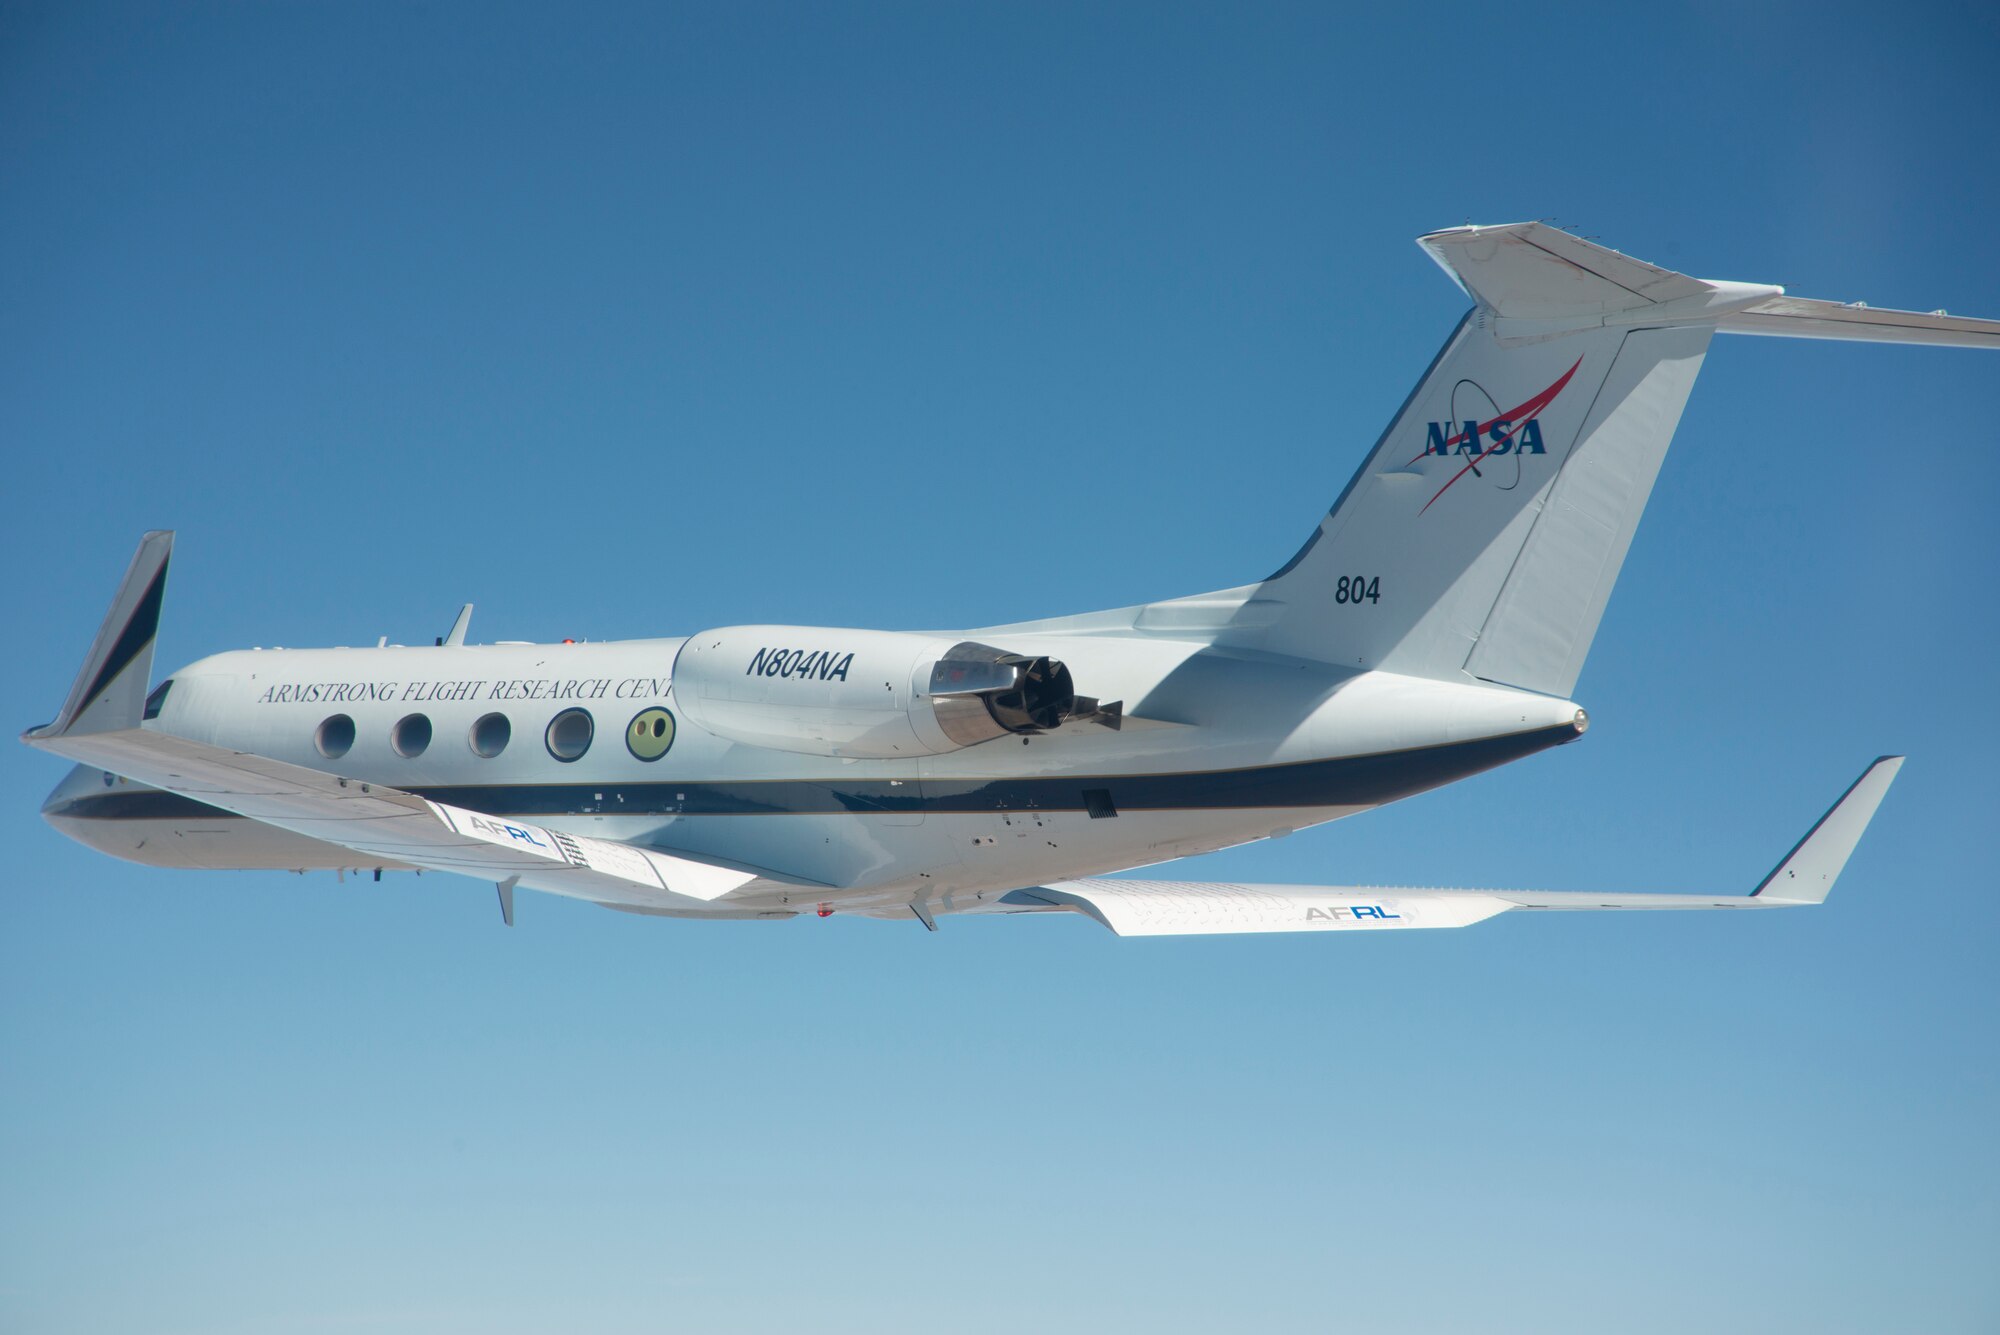 The modified Gulfstream III flight research aircraft with an adaptive compliant wing trailing edge is shown with 25 degrees of trailing edge deflection. (Courtesy photo)